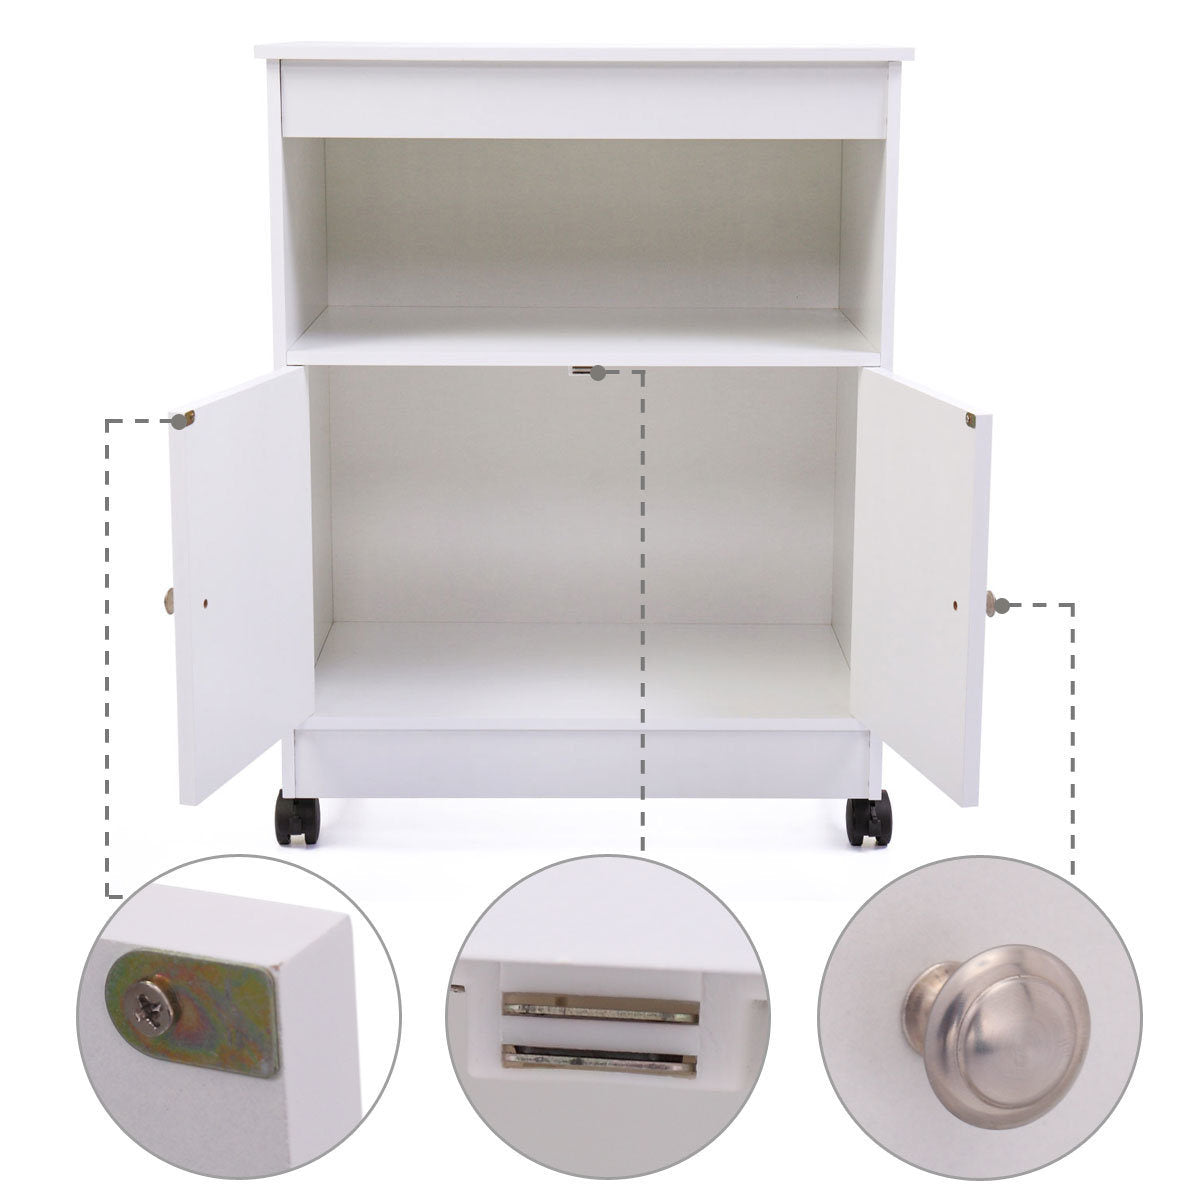 A Wood Kitchen Microwave Cabinet Cart with 4 Universal Wheels and Roomy Inner Space for Home Use, White in a kitchen.